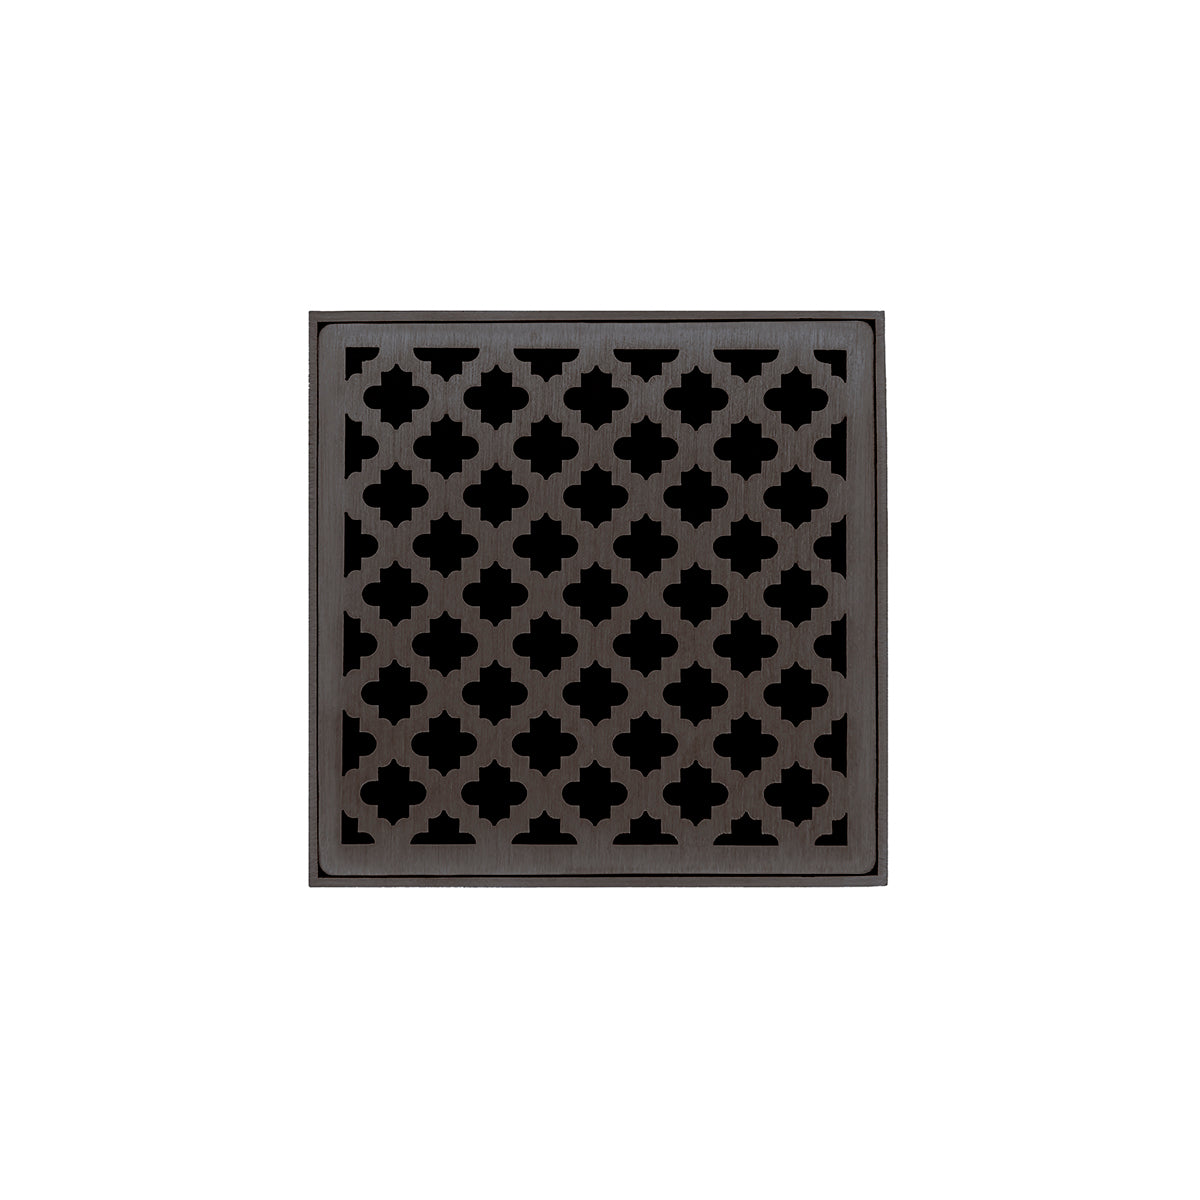 Infinity Drain 5" x 5" MD 5 High Flow Premium Center Drain Kit with Moor Pattern Decorative Plate with PVC Drain Body, 3" Outlet